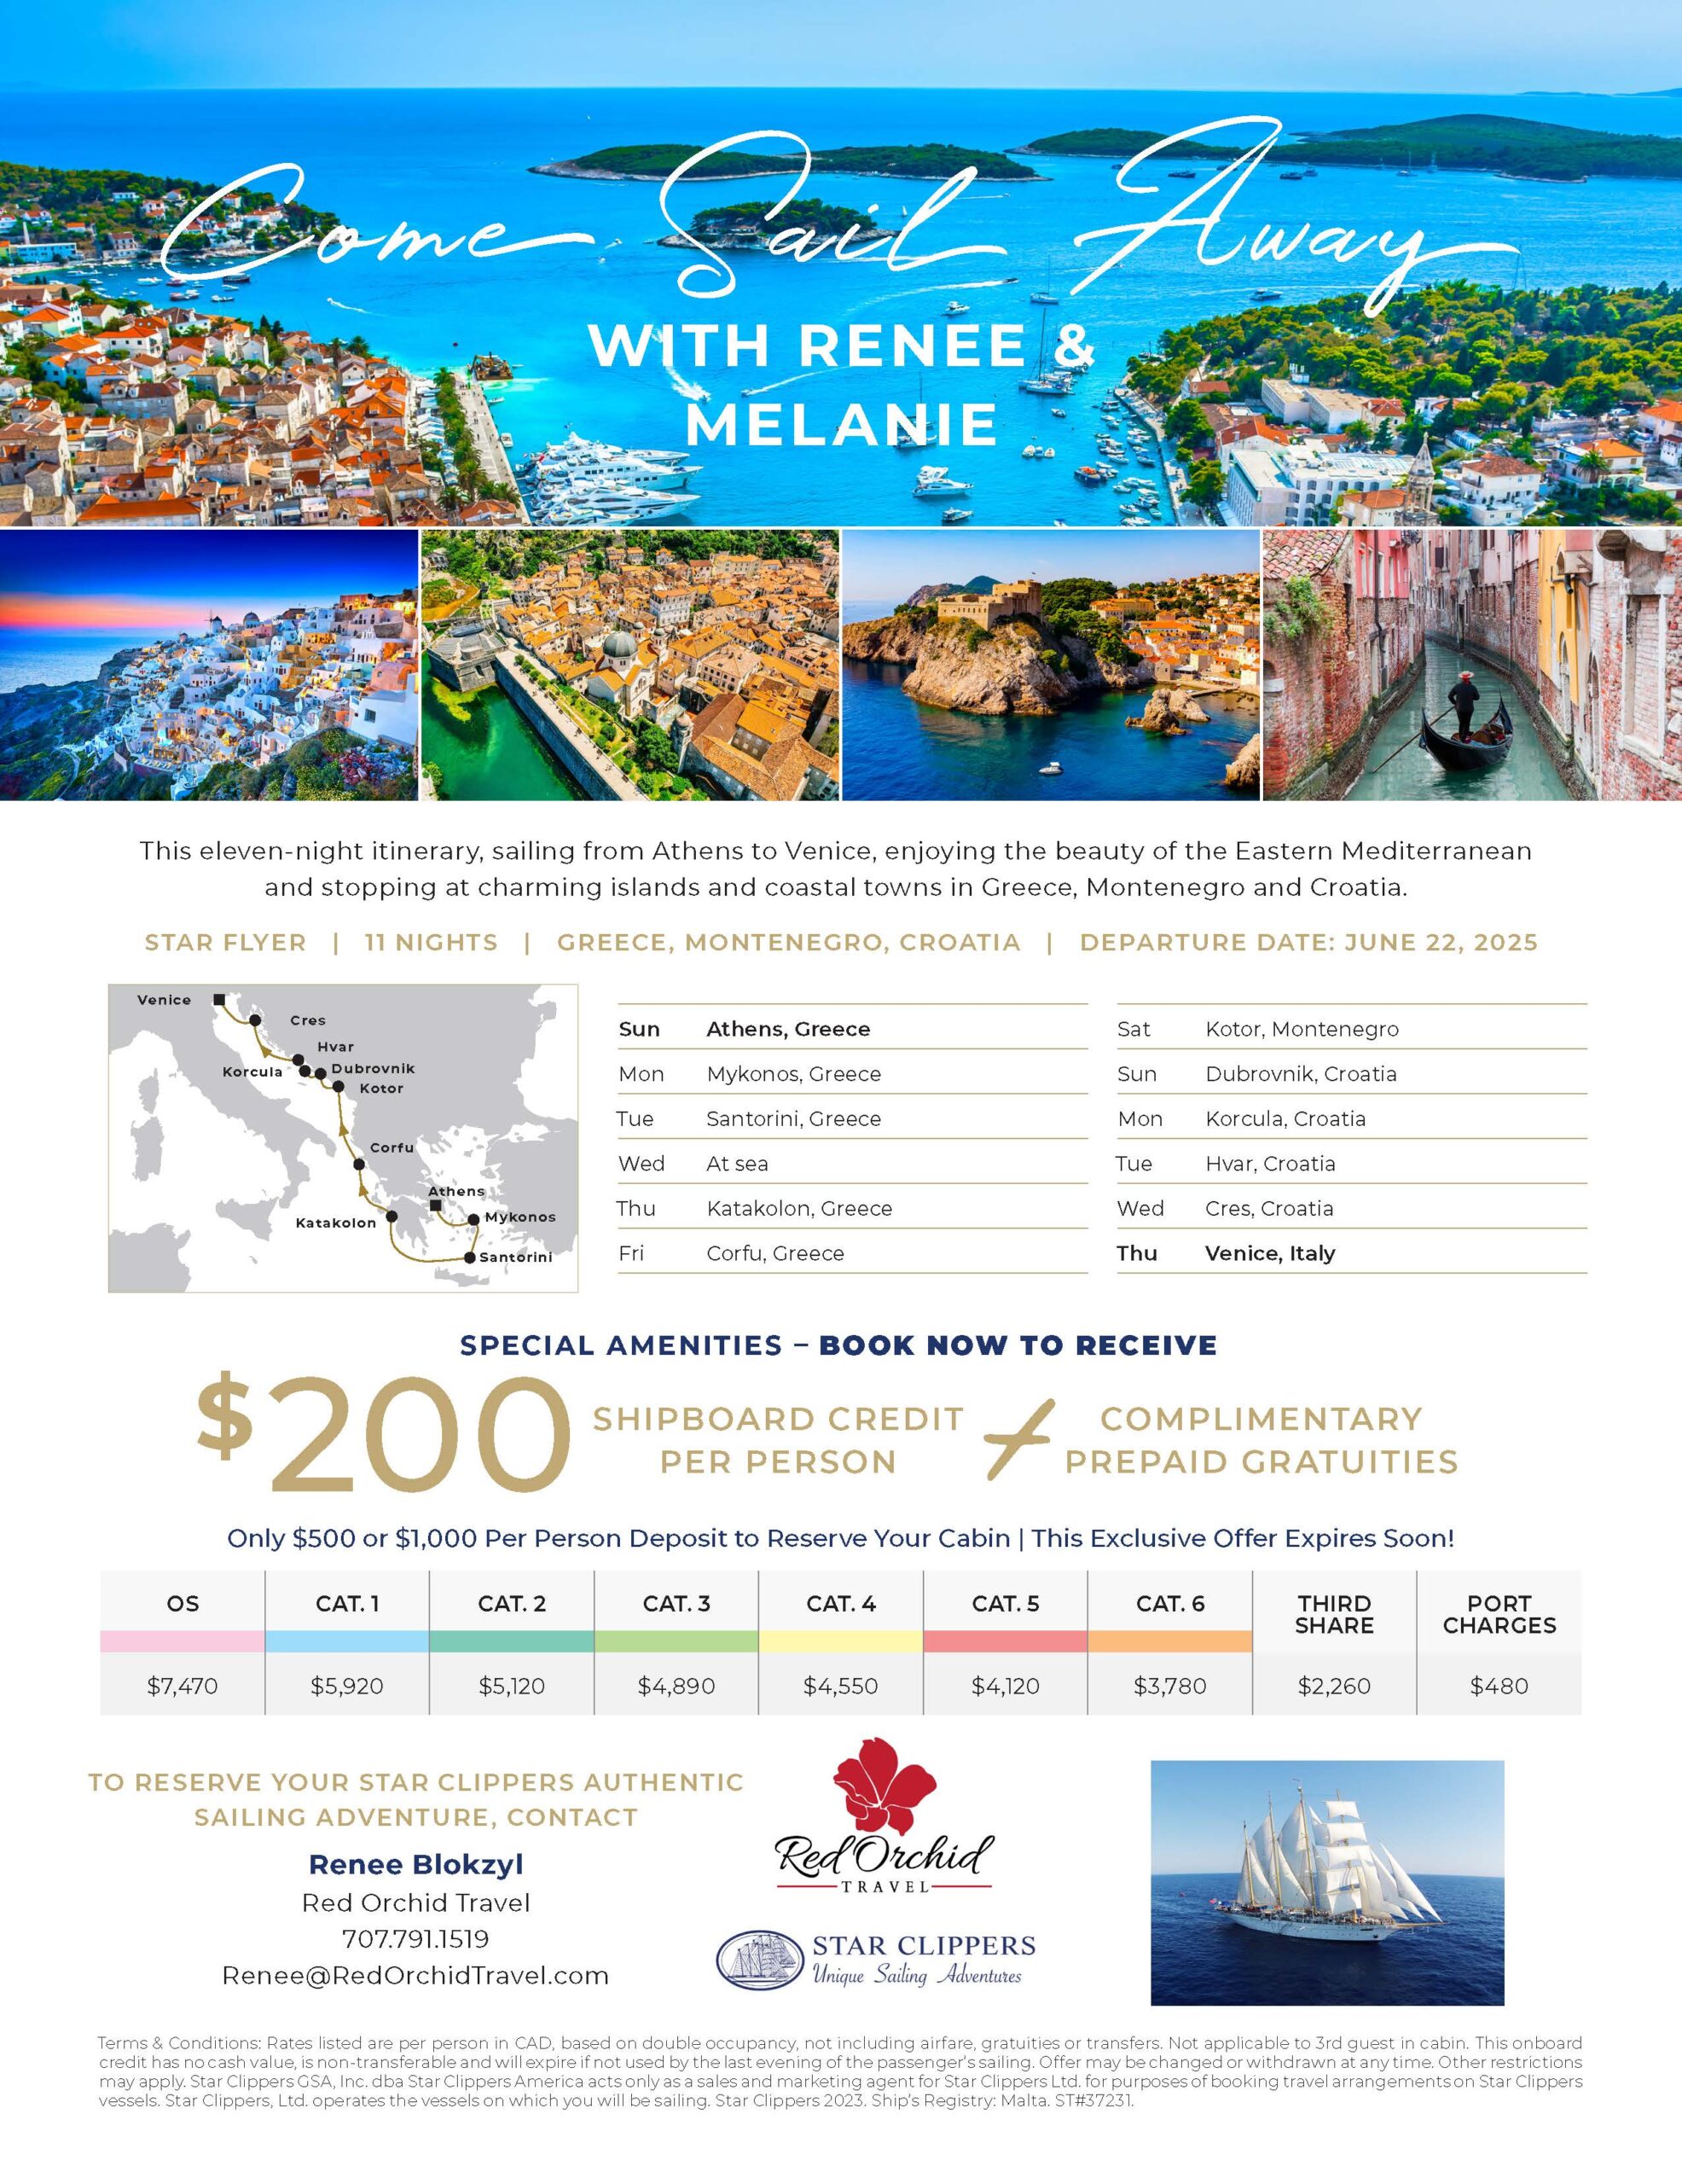 Join Red Orchid Travel on an 11-night sailing from Athens to Venice!